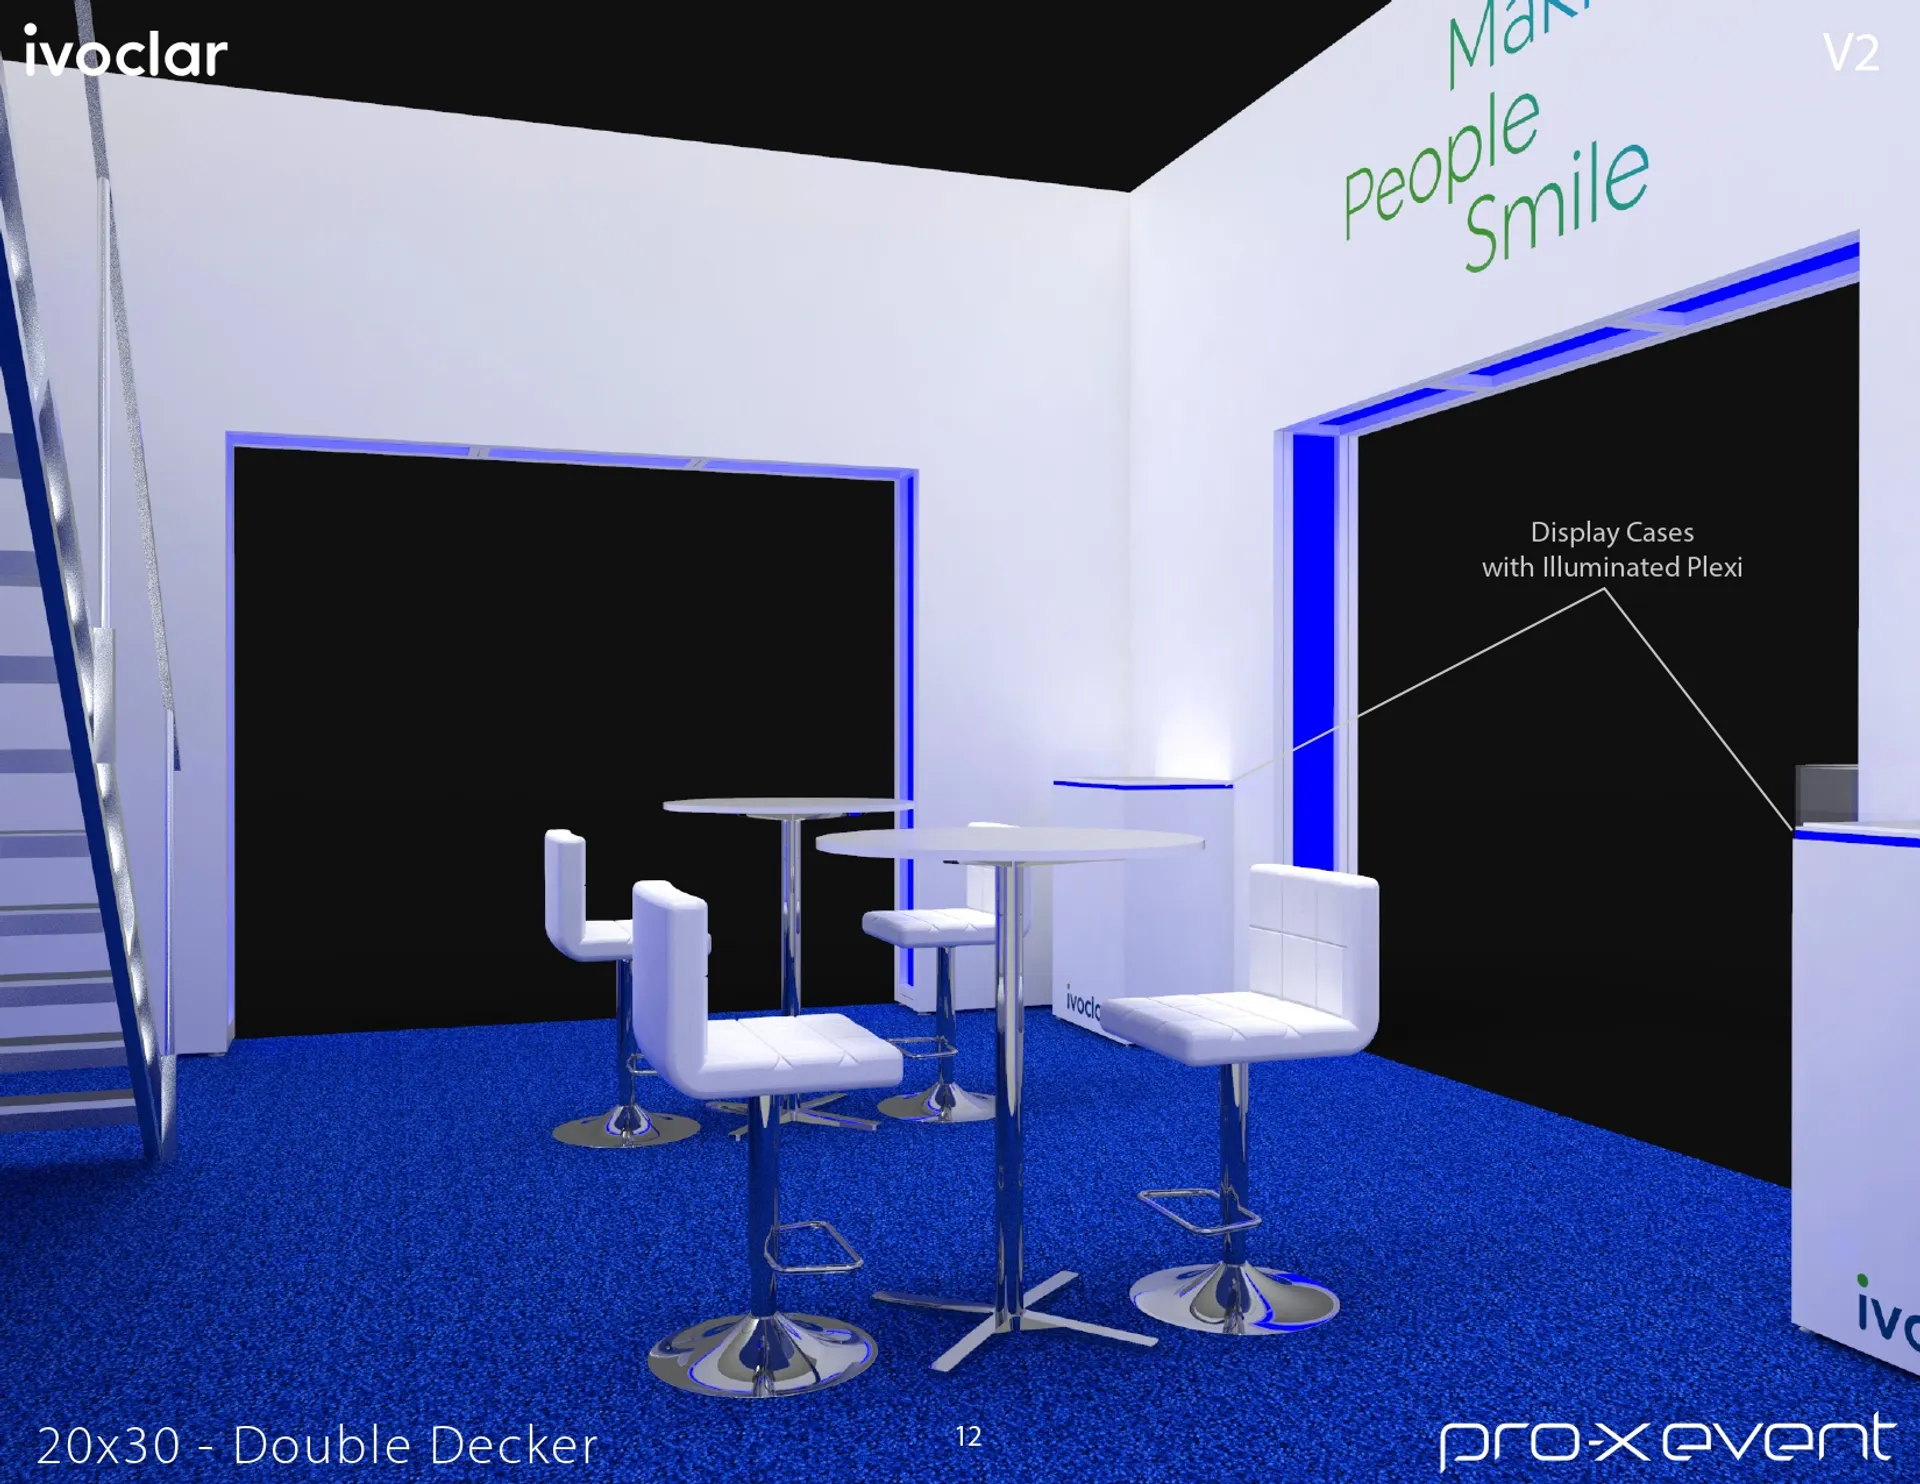 booth-design-projects/Pro-X Exhibits/2024-04-11-20x30-ISLAND-Project-55/IVOCLAR_20x30_DOUBLE DECKER_2022_V2-12_page-0001-tehiev.jpg